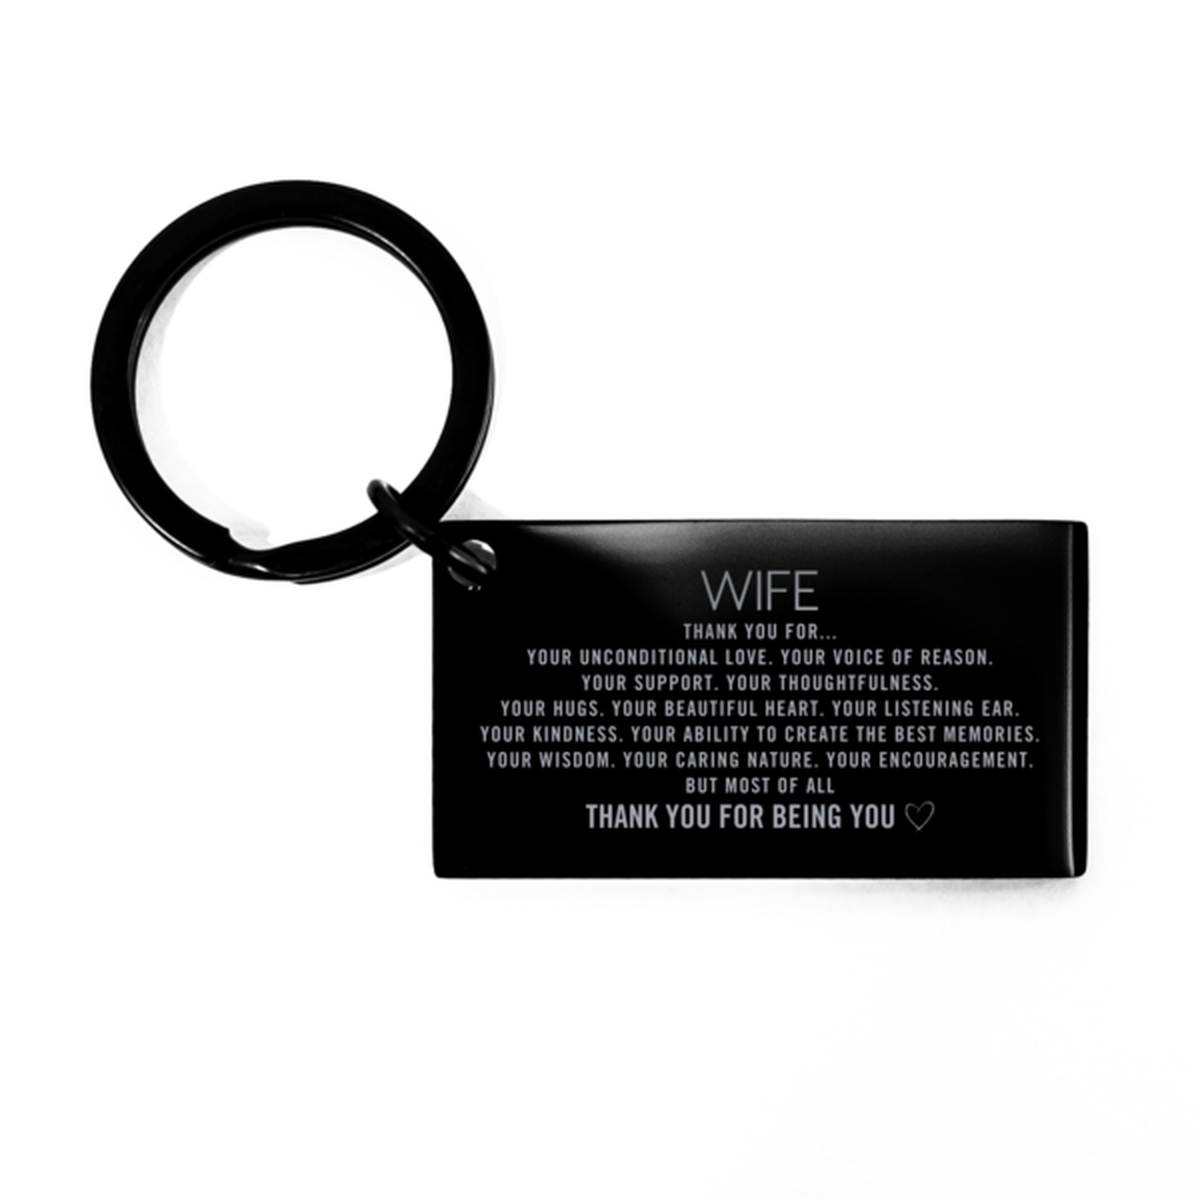 Wife Keychain Custom, Engraved Gifts For Wife Christmas Graduation Birthday Gifts for Men Women Wife Thank you for Your unconditional love